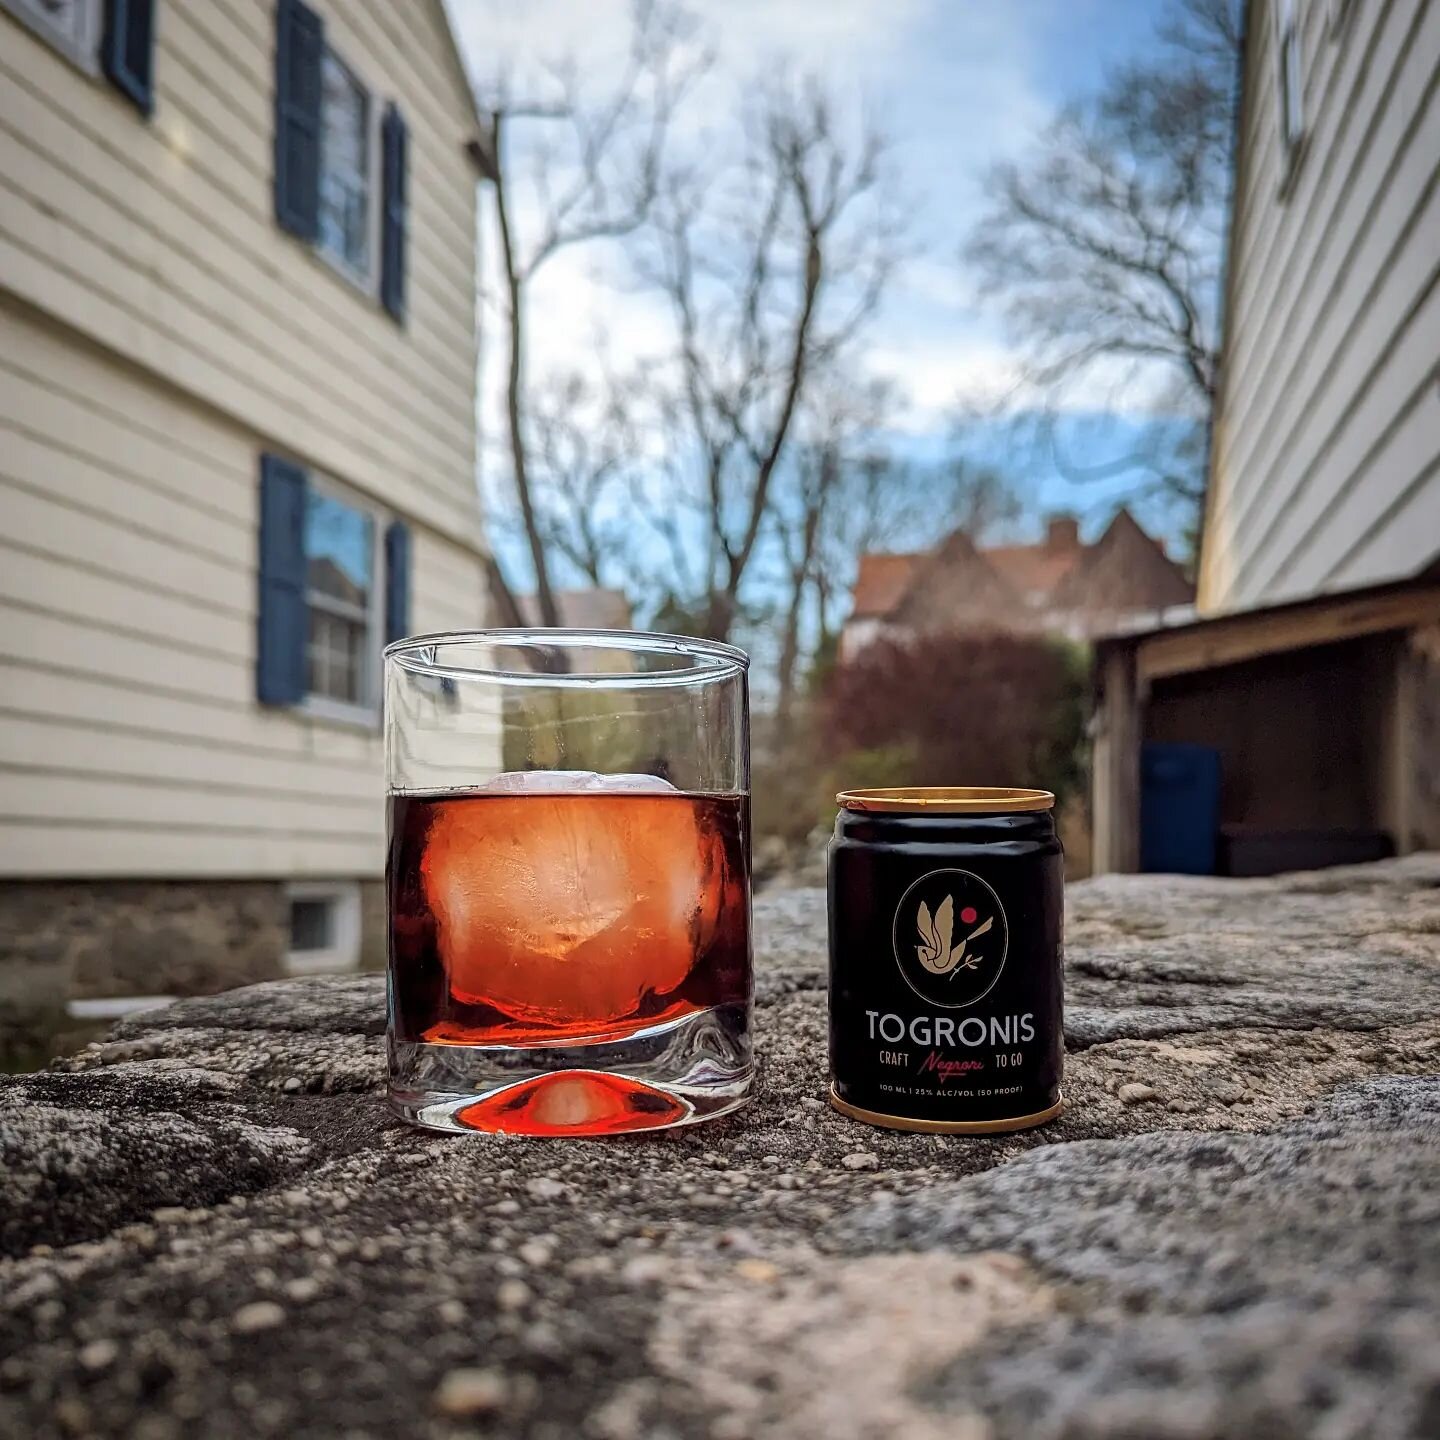 Randomly stumbled upon @Togronis here on Instagram...and super glad I did.
.
For those unacquainted, a classic #Negroni is equal parts gin, Campari (the bittersweet Italian liqueur), and sweet vermouth. It's our 2nd favorite cocktail to make at home 